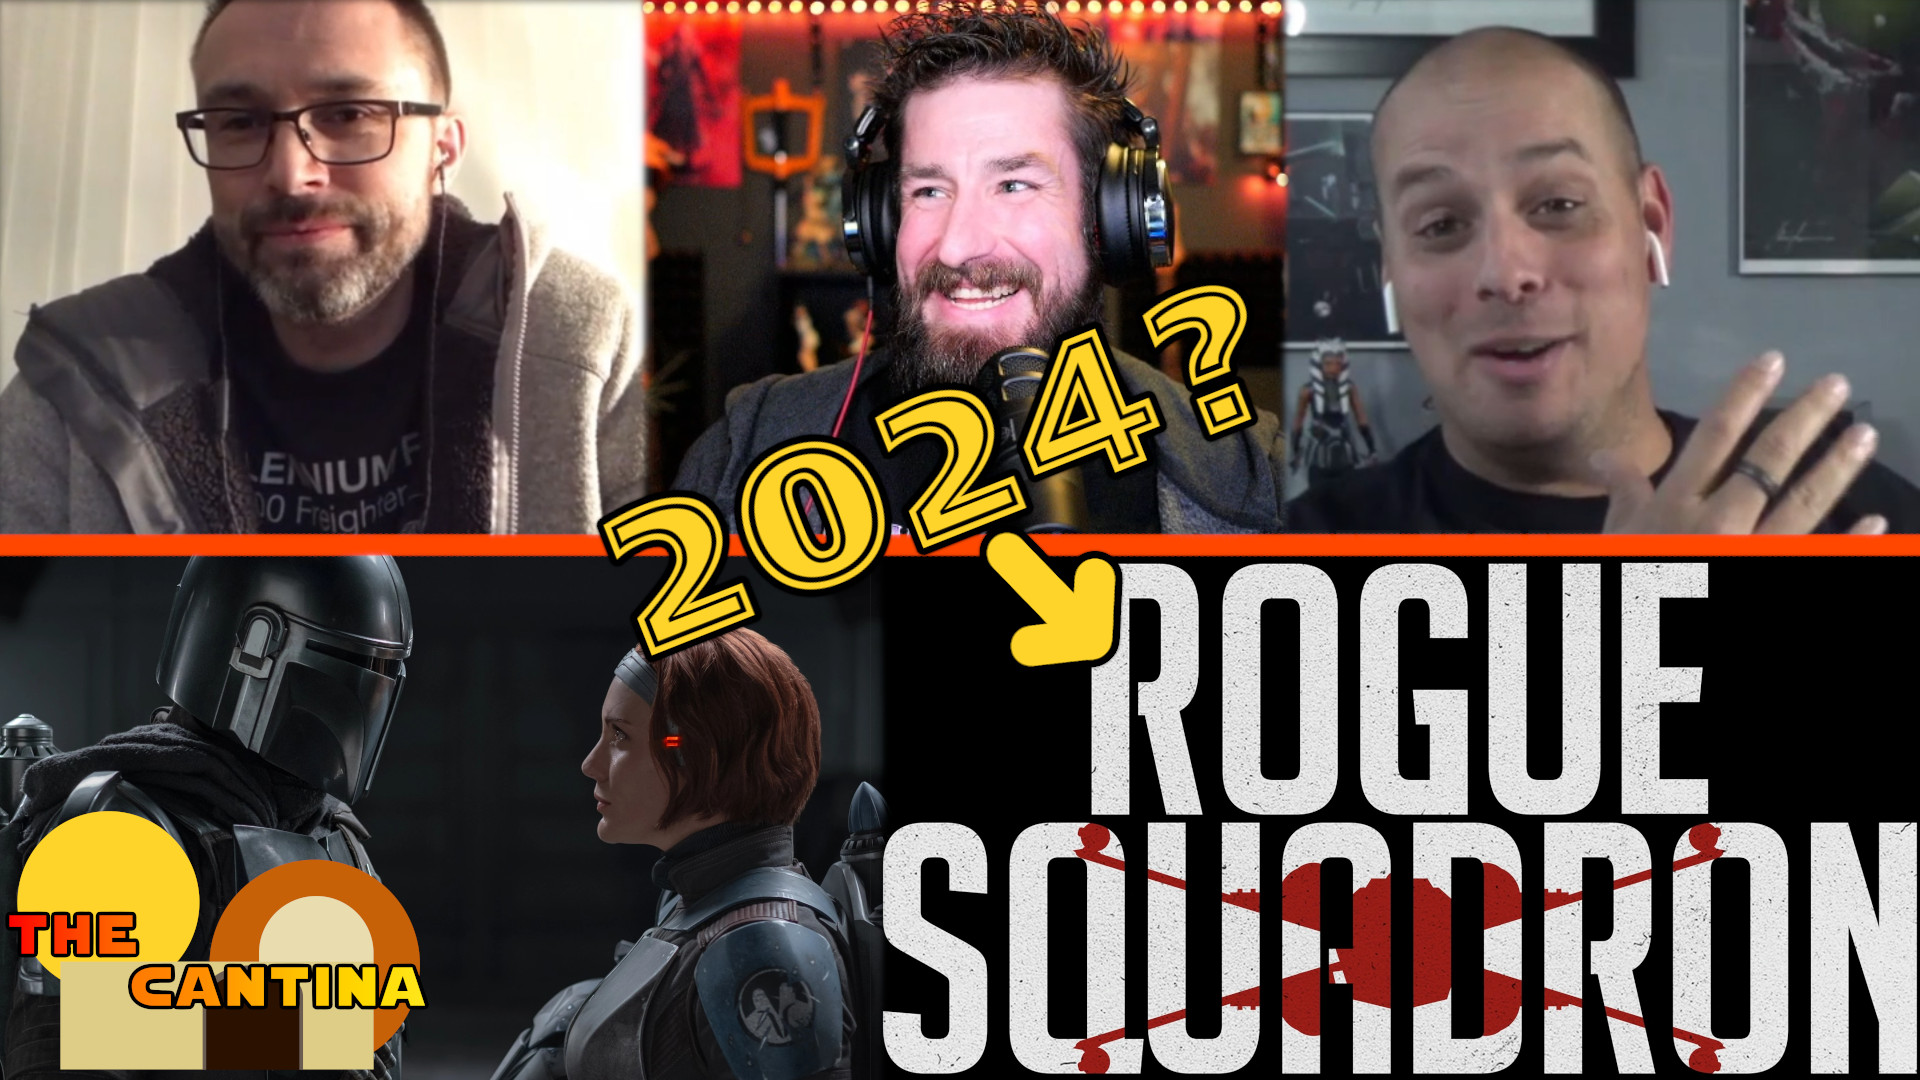 Star Wars News & Rumors: Rogue Squadron Release In 2024? | The Cantina